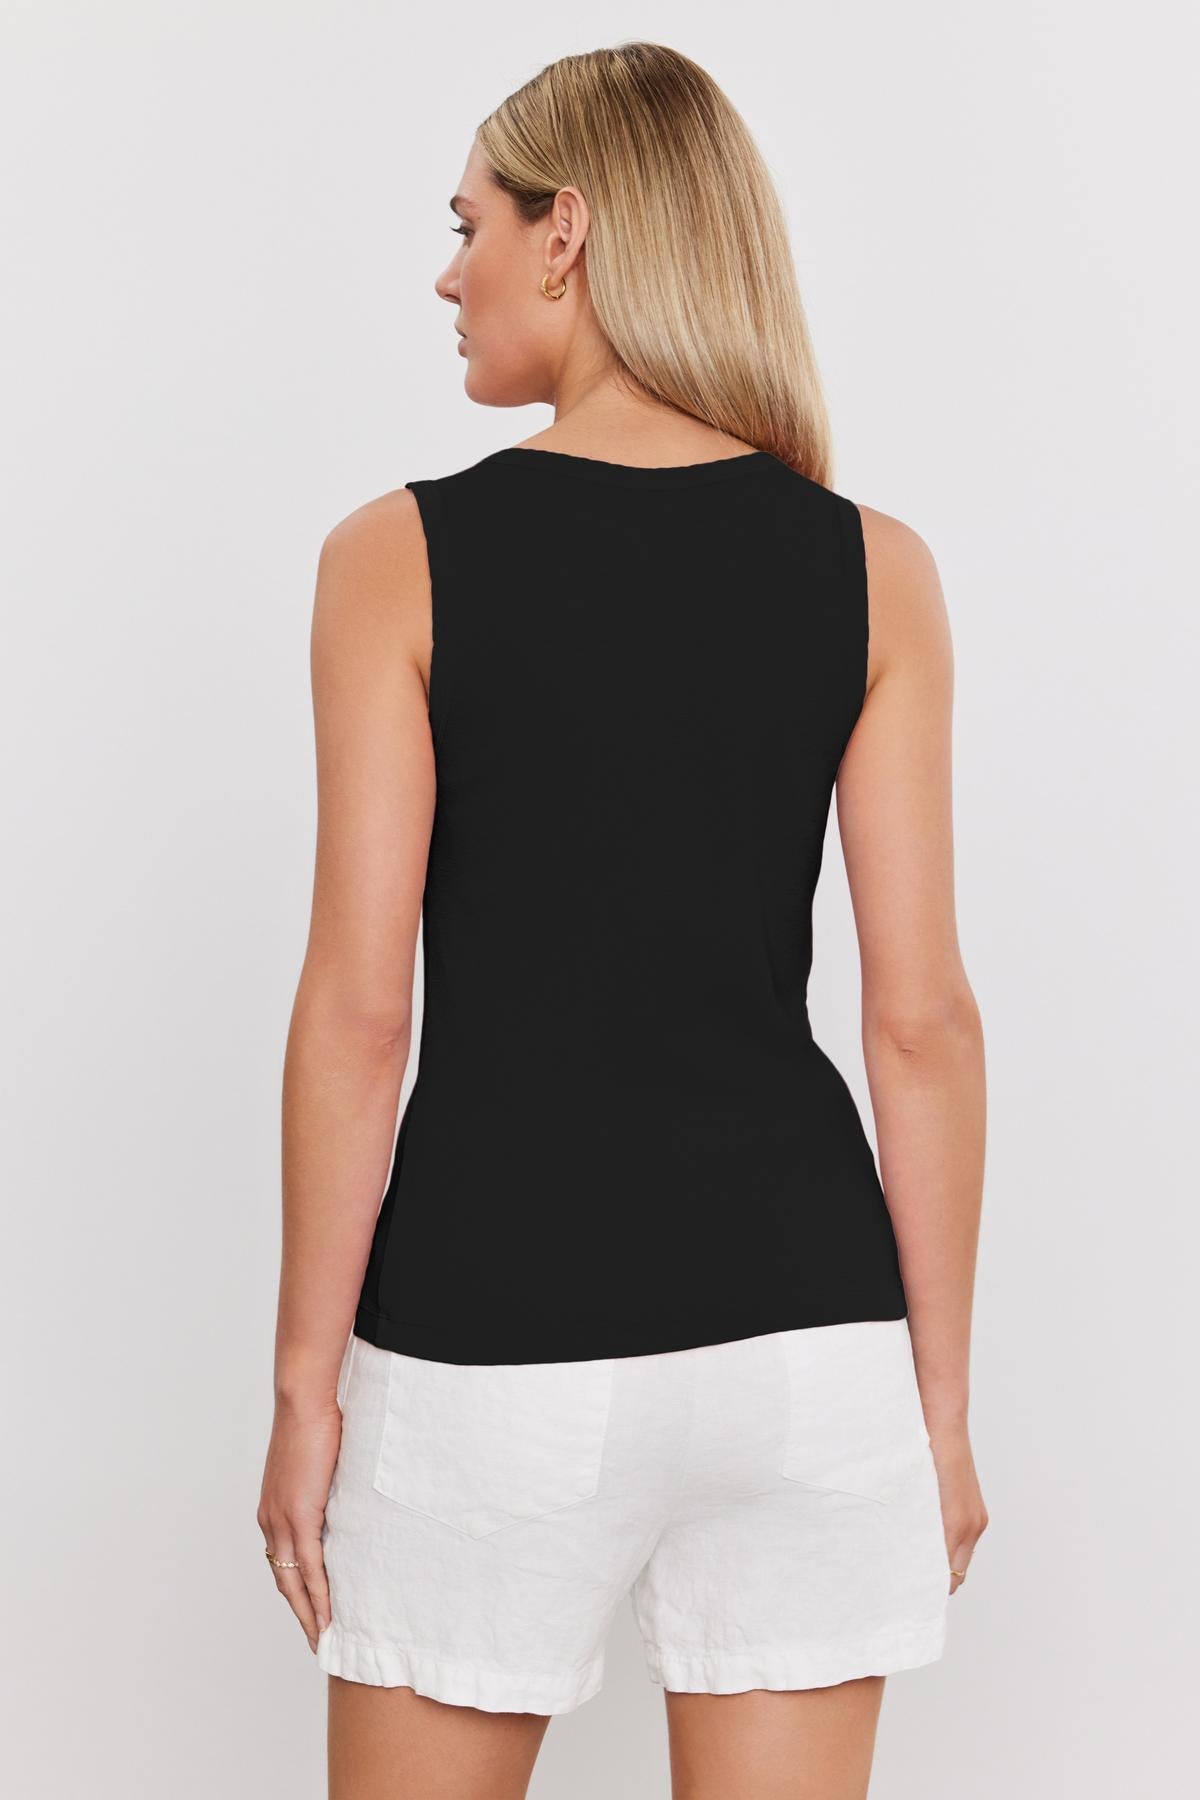 A woman with straight, long blonde hair is shown from the back, wearing a MAXIE RIBBED TANK TOP by Velvet by Graham & Spencer and white shorts against a plain white background.-37241154404545